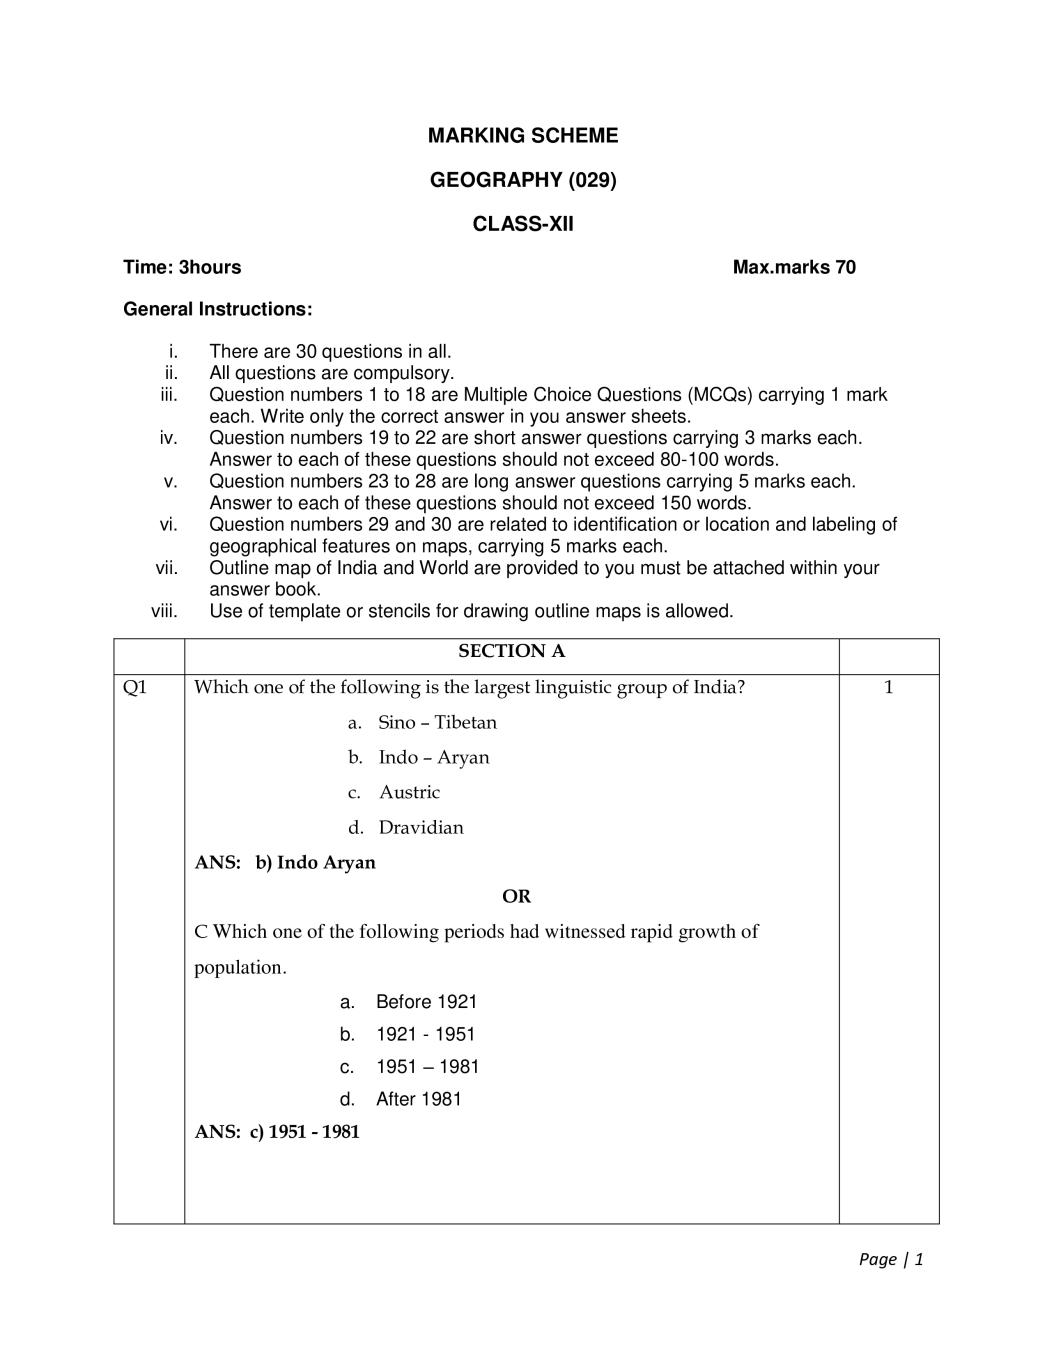 CBSE Class 12 Marking Scheme 2020 for Geography - Page 1